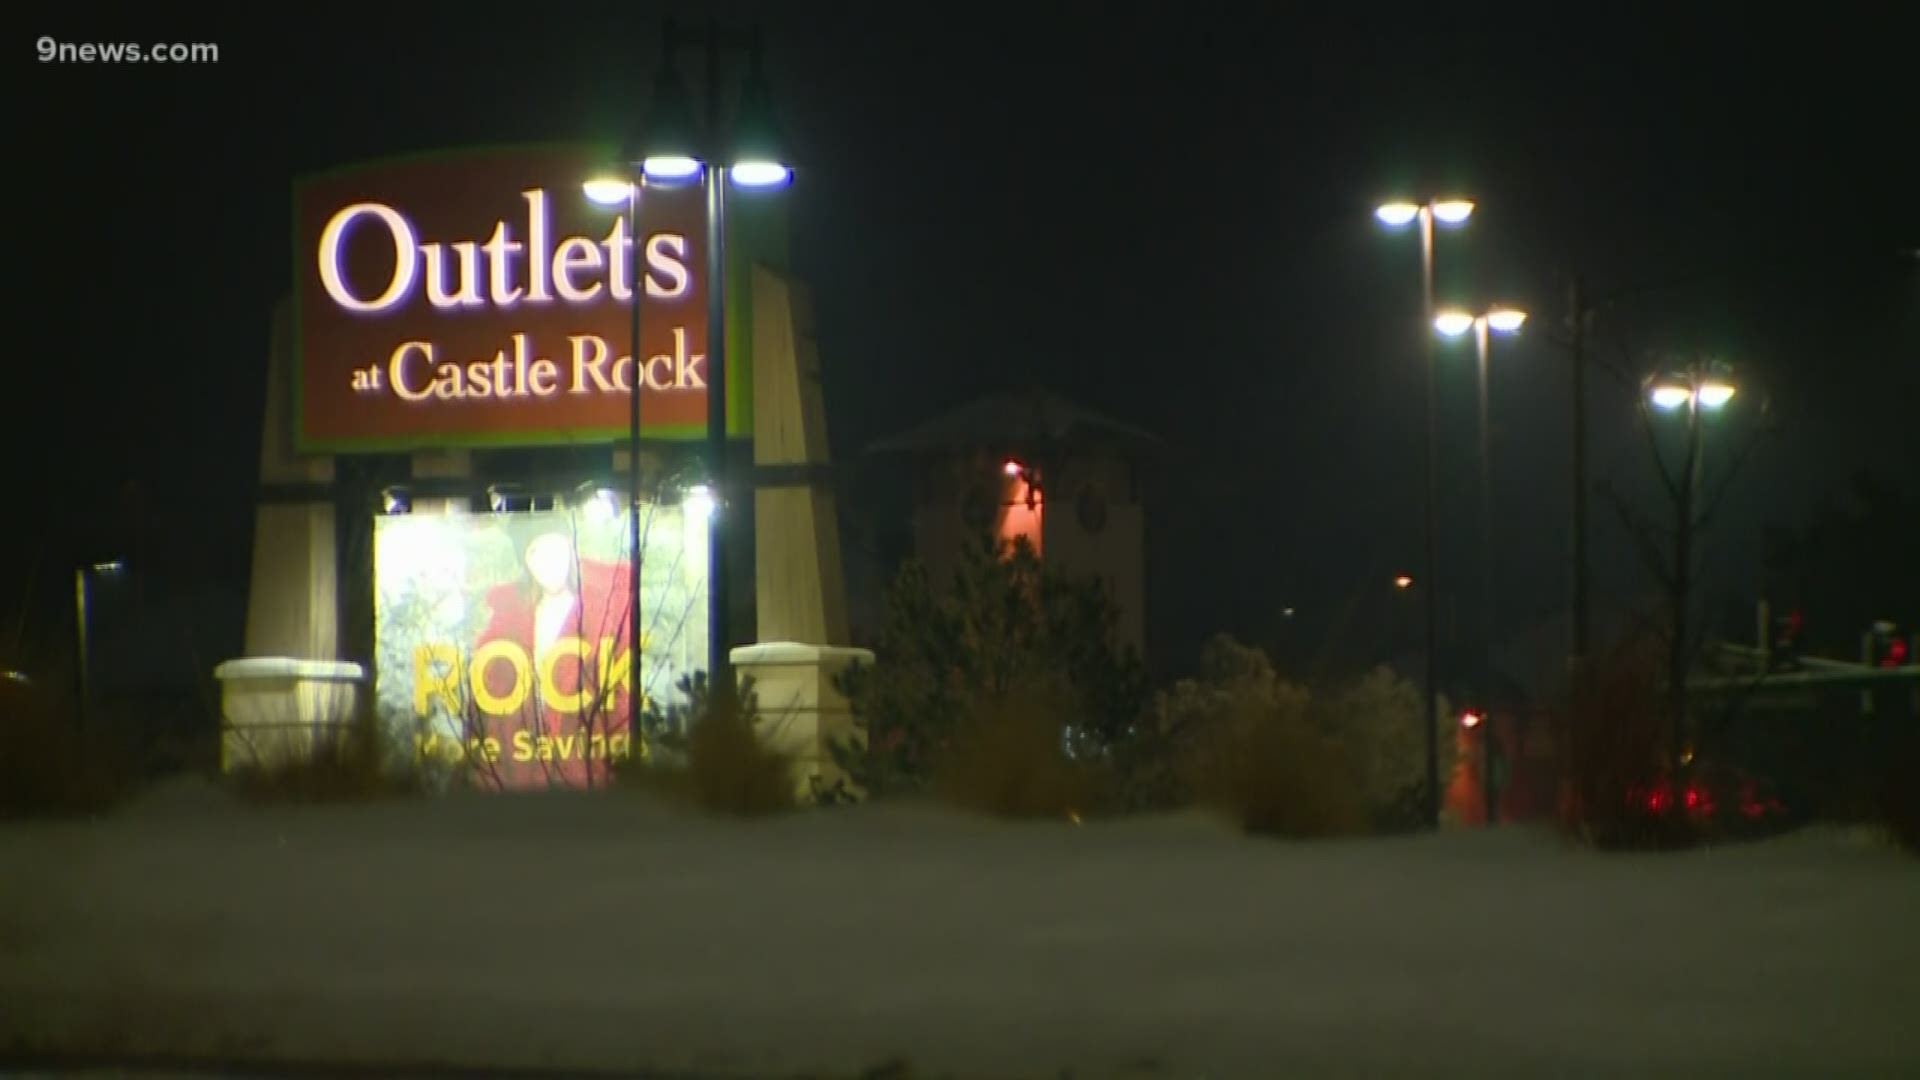 The suspects made their way in during business hours and disabled alarms and then returned after hours, according to Castle Rock police.